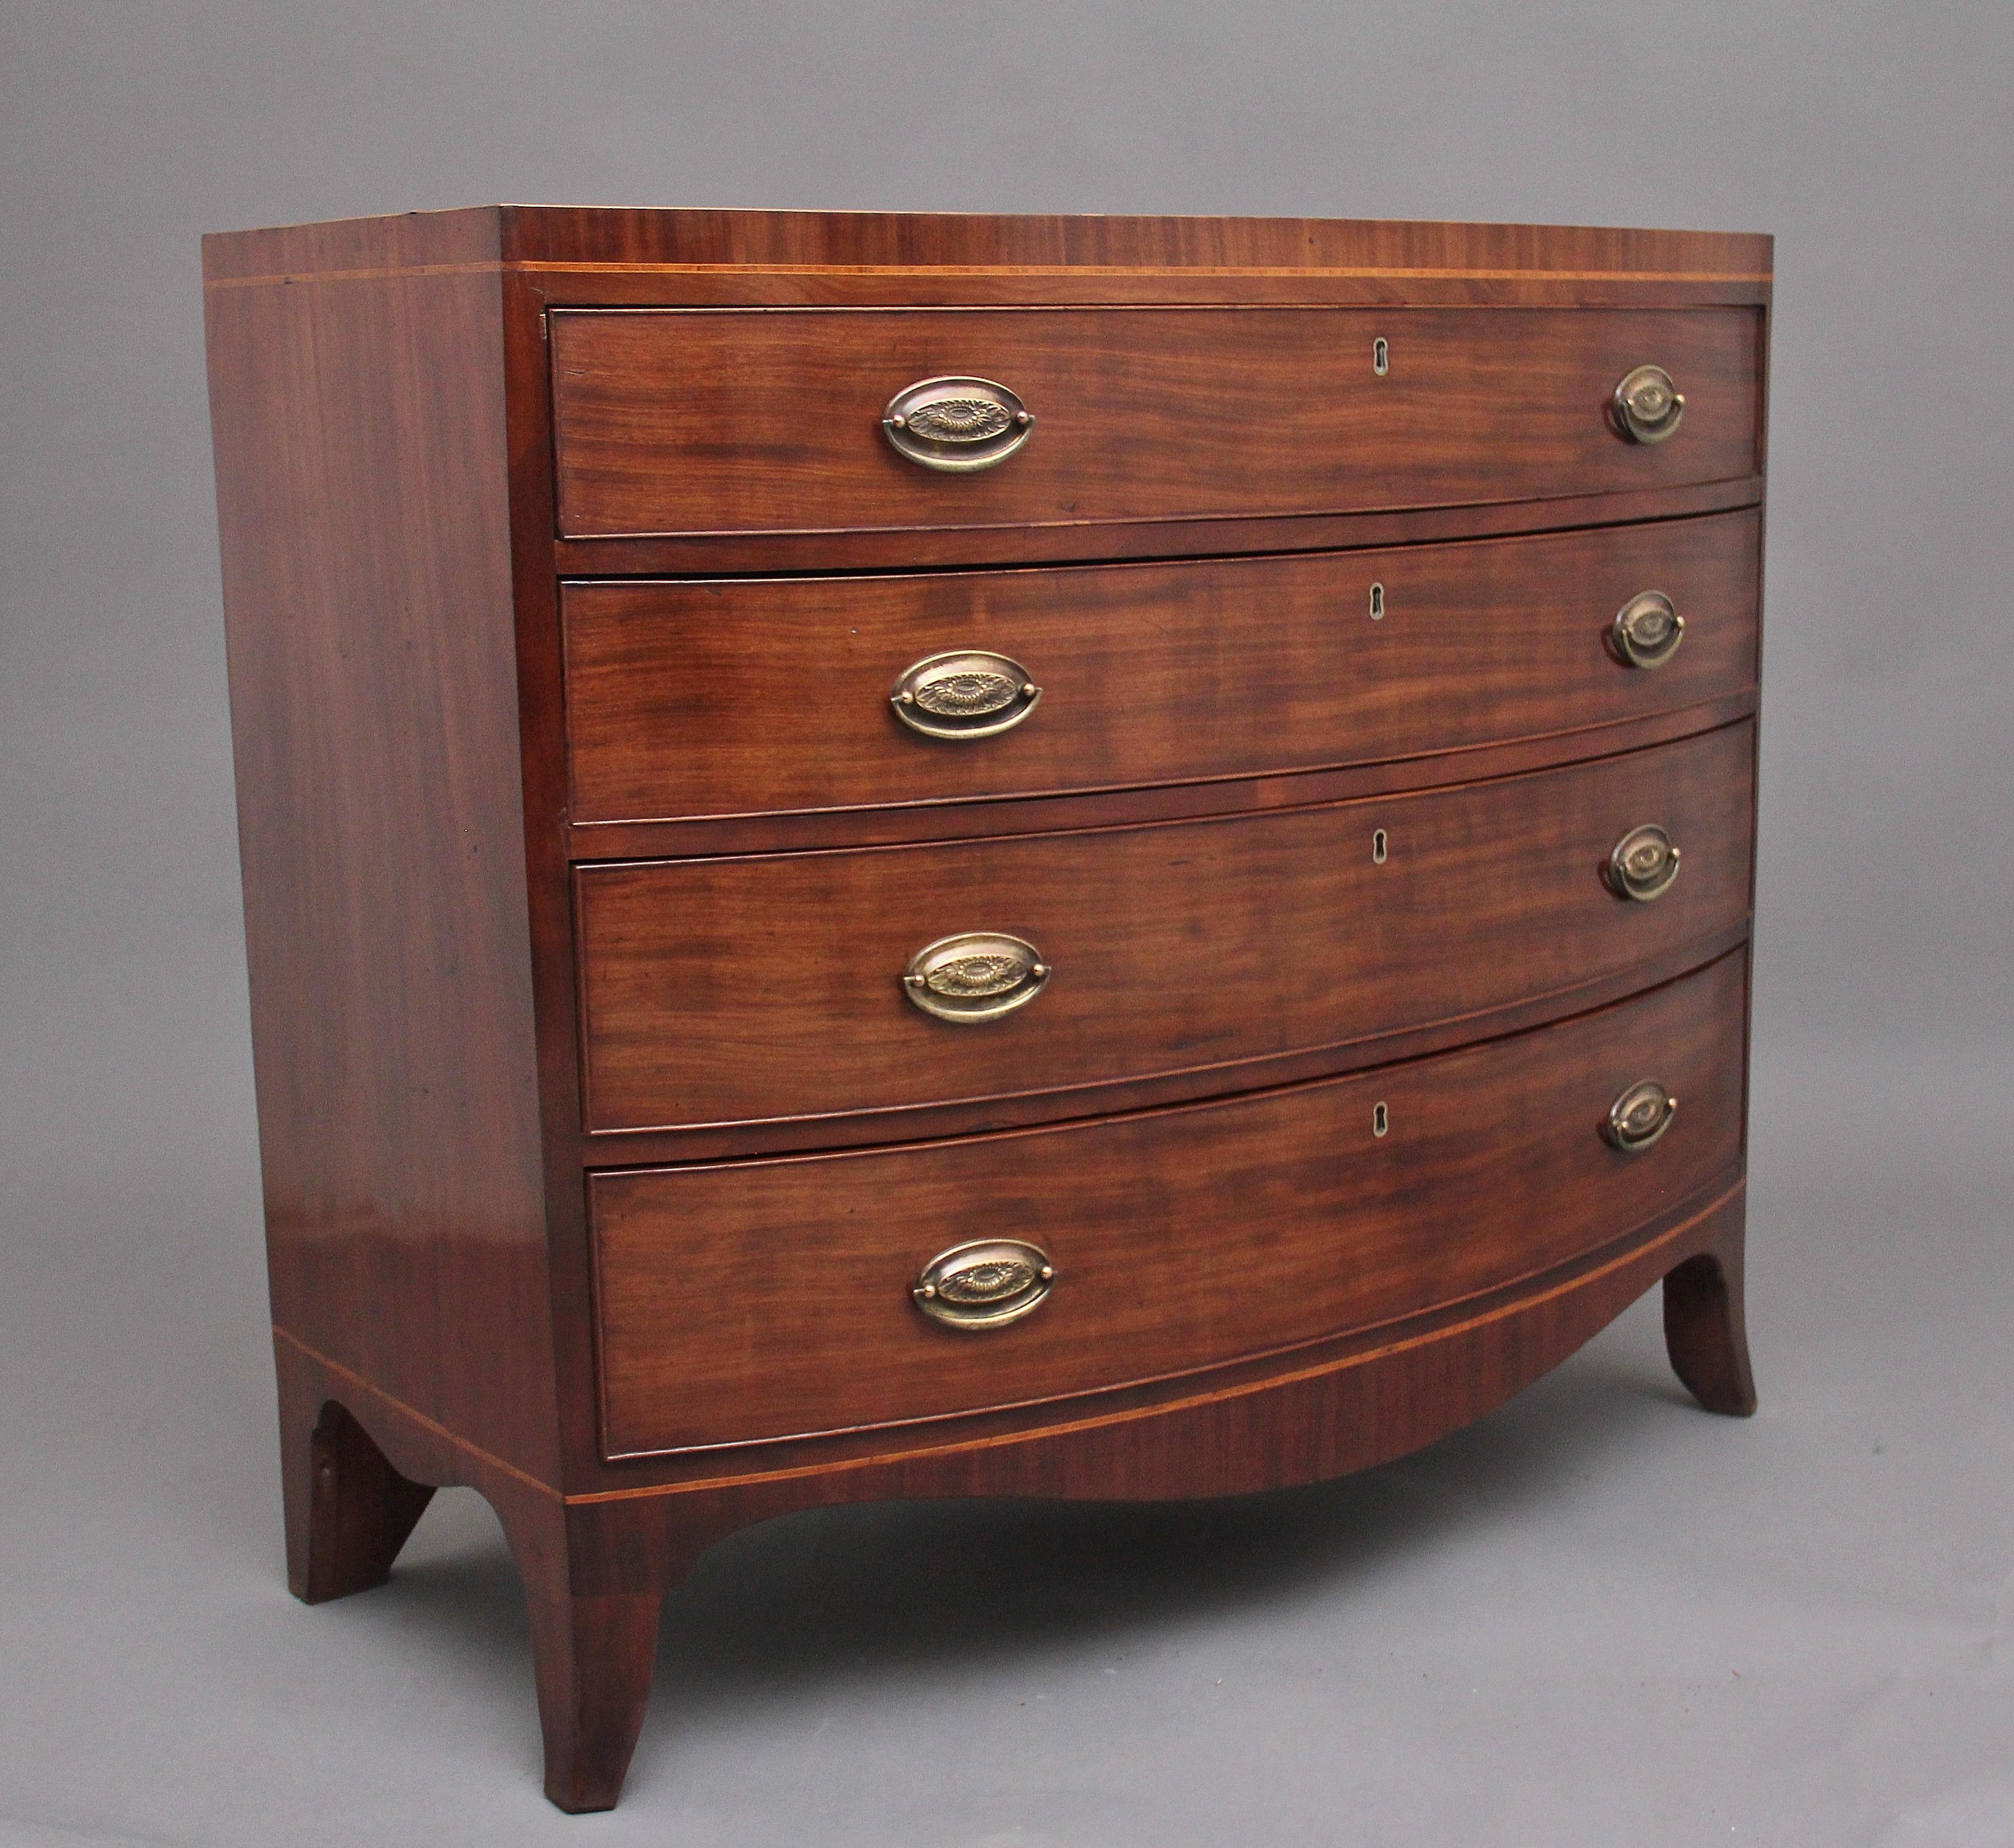 Early 19th Century mahogany bowfront chest of drawers of nice proportions, having a lovely crossbanded figured top above four long oak lined graduated drawers, with oval brass plate handles, shaped apron on the front and sides, supported on splay